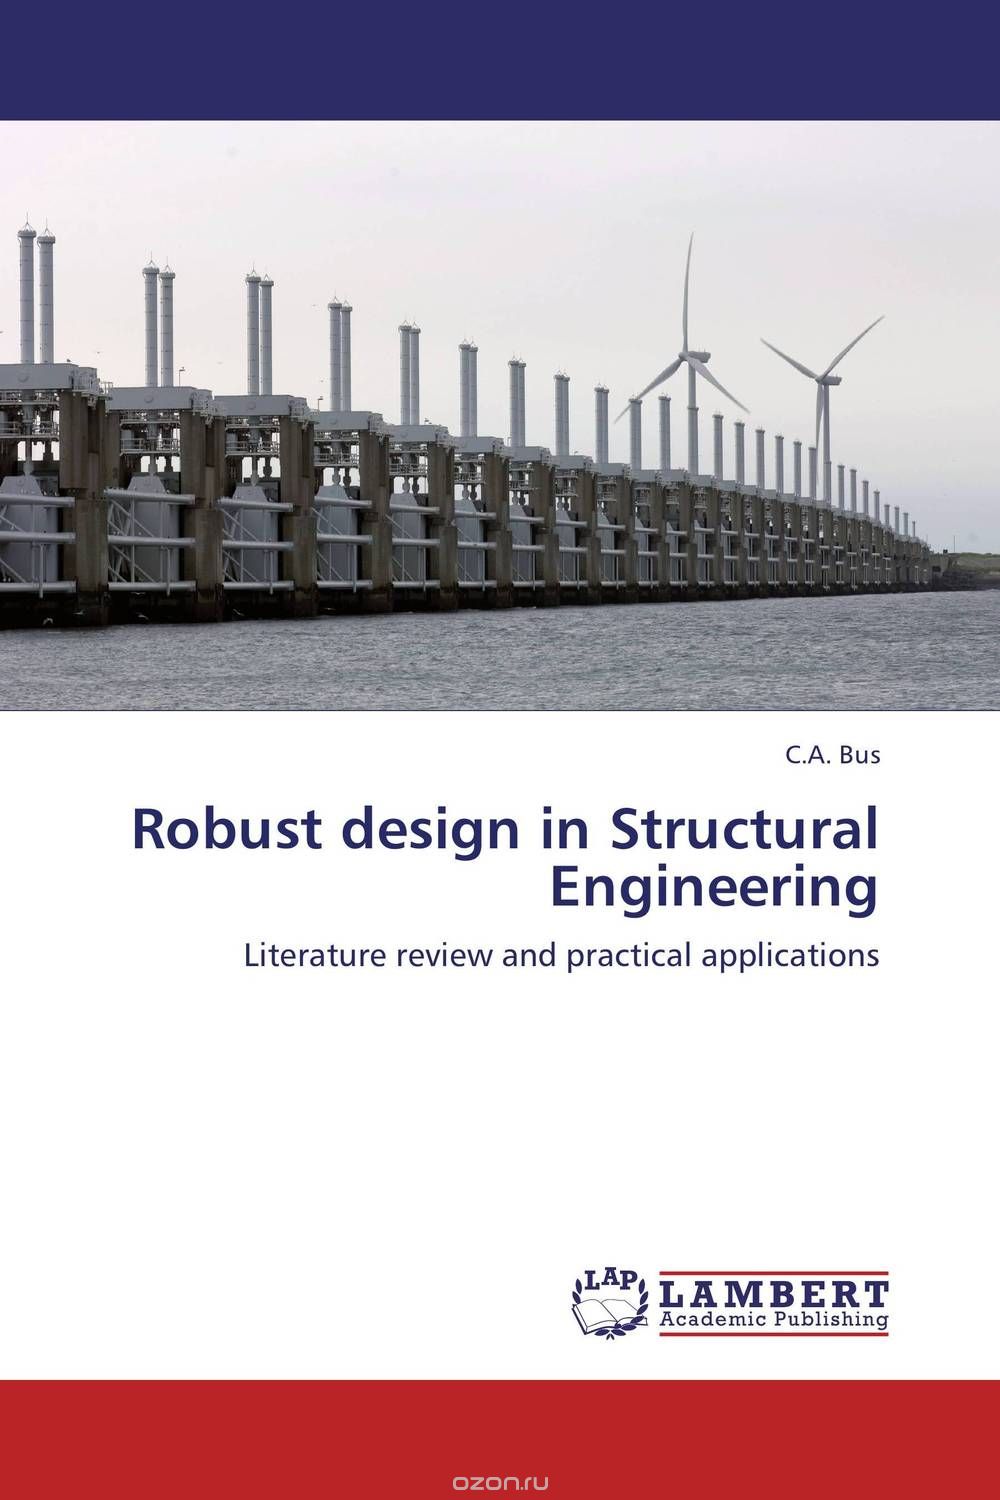 Robust design in Structural Engineering